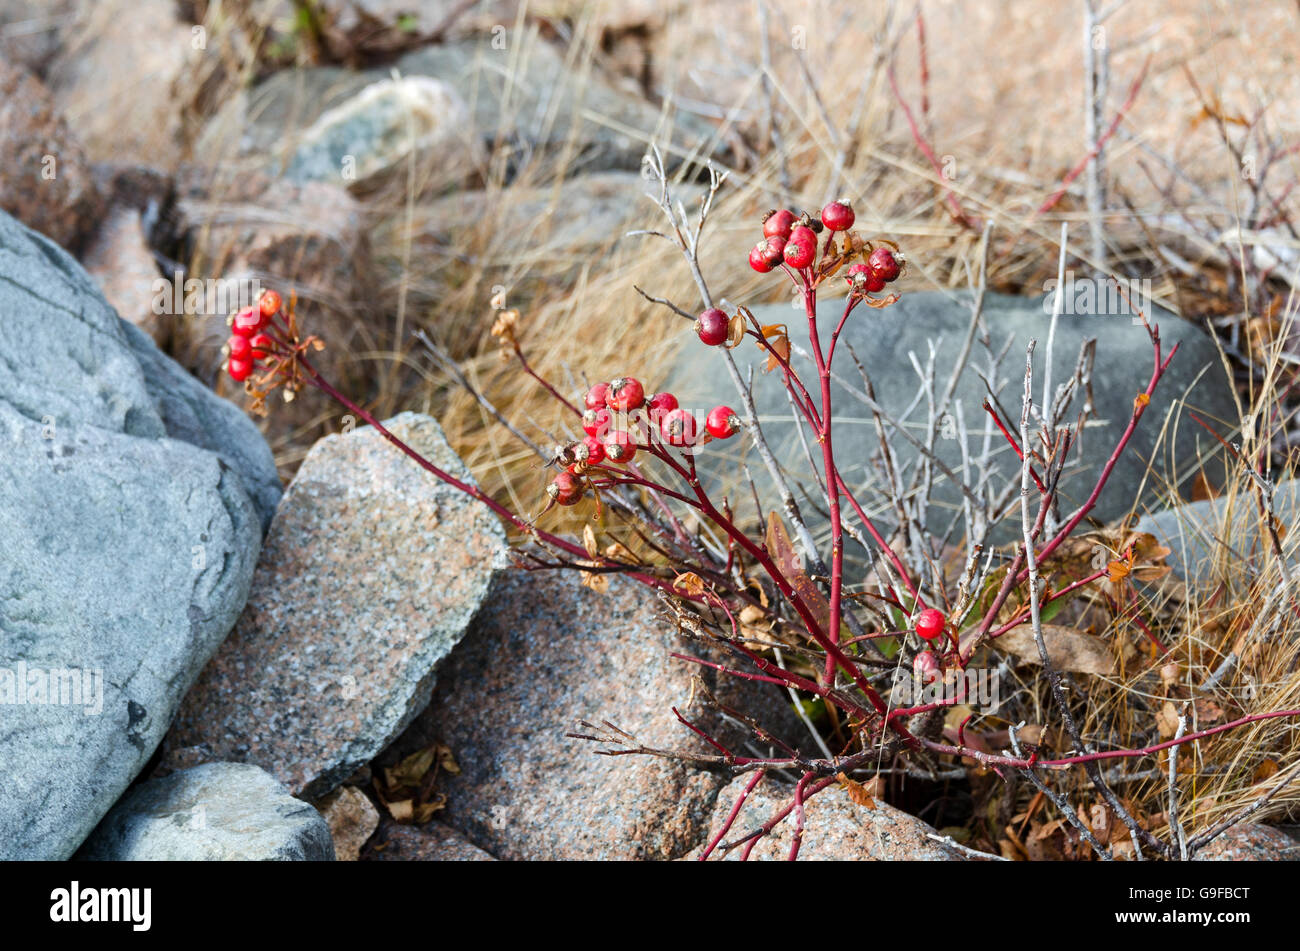 A Carolina Rose growing between boulders on the coast of Maine shows bright scarlet rose hips. Stock Photo